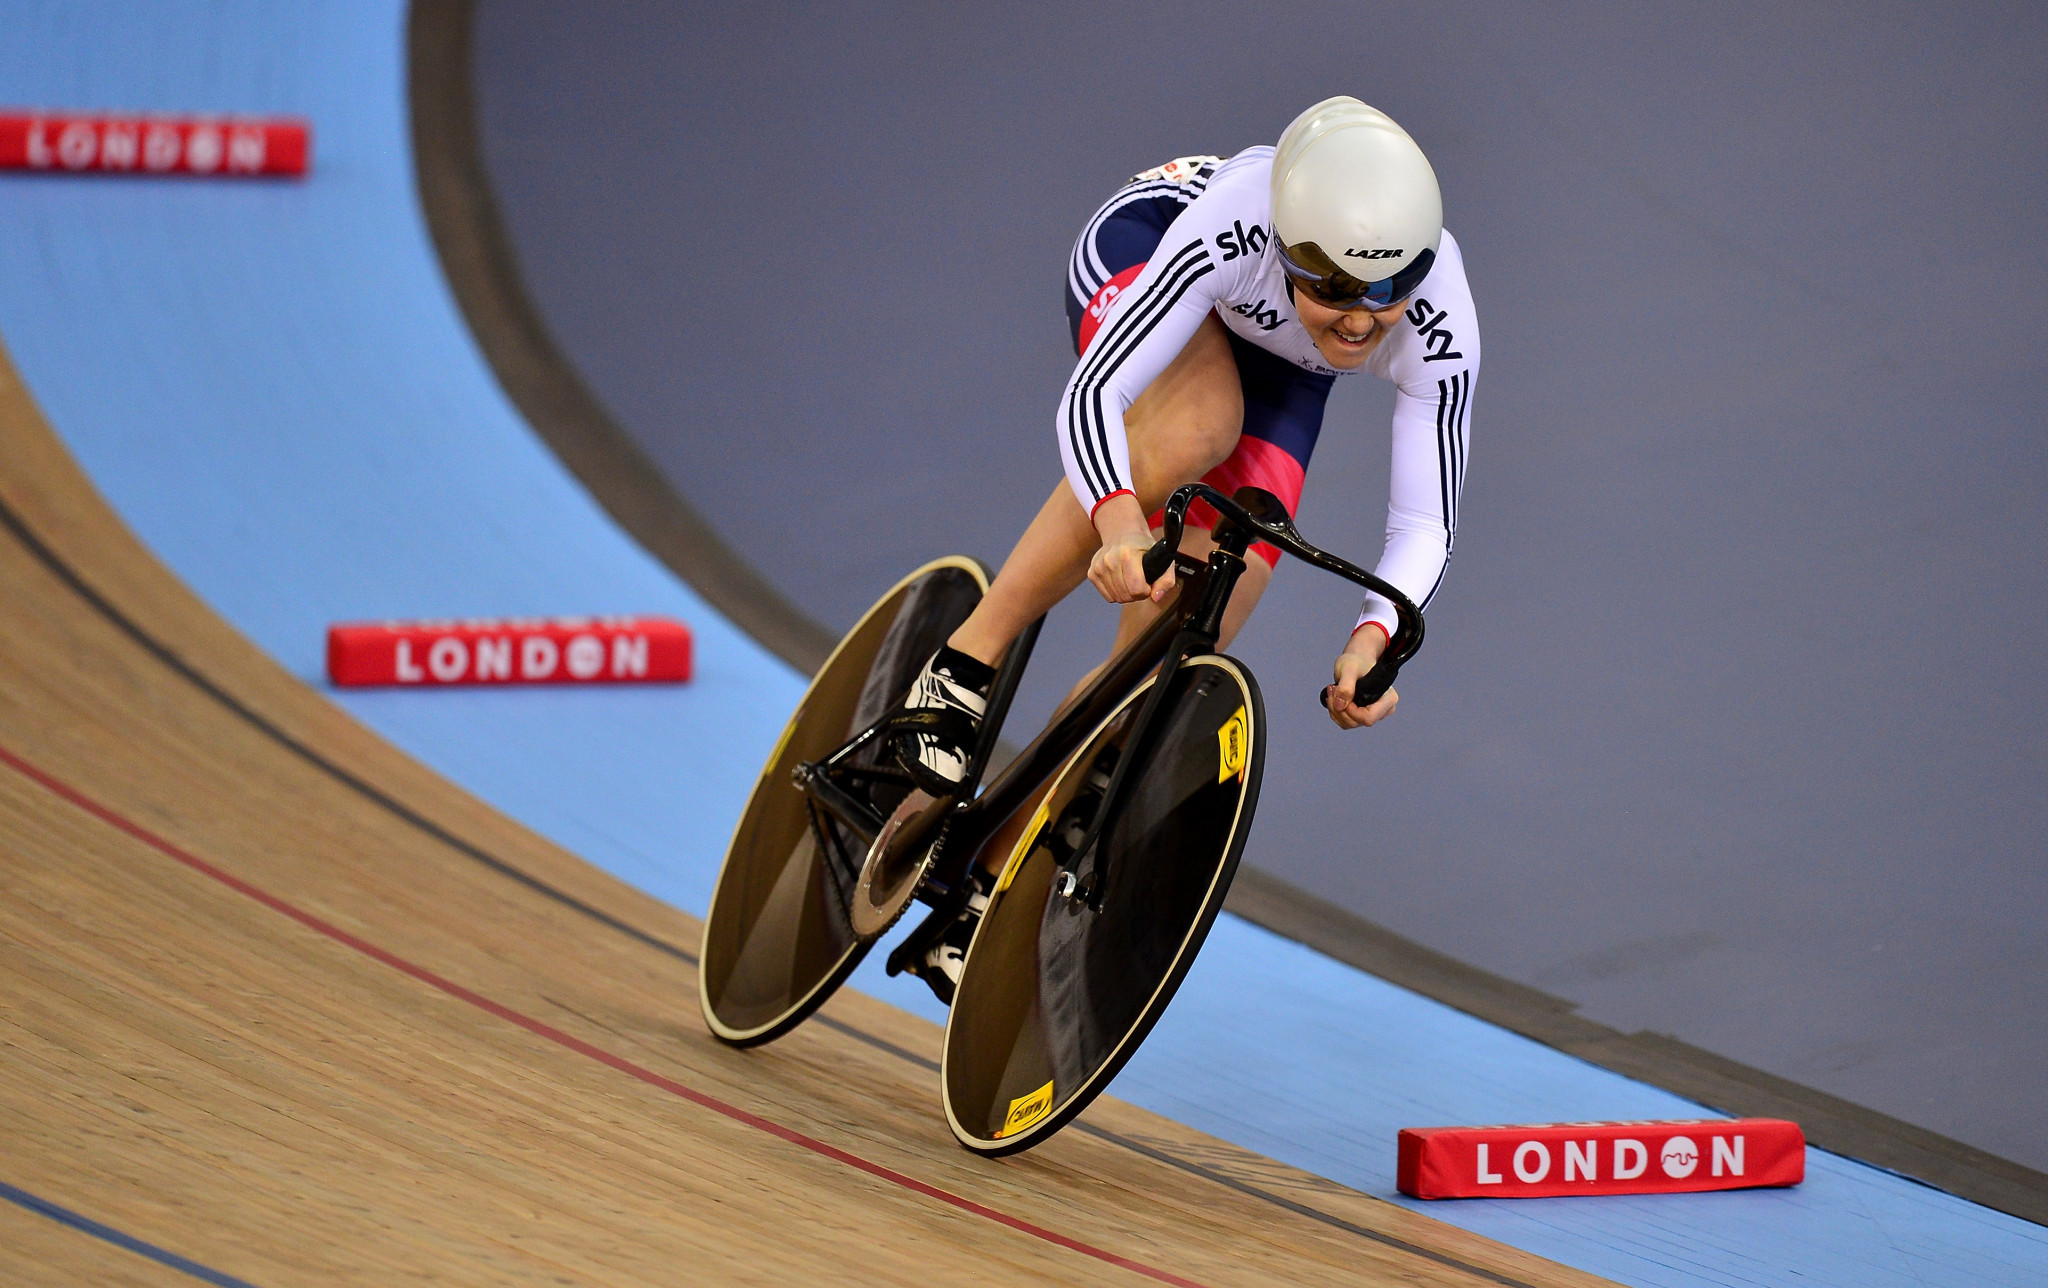 Jess Varnish is a former European team sprint champion and world silver medallist ©Getty Images